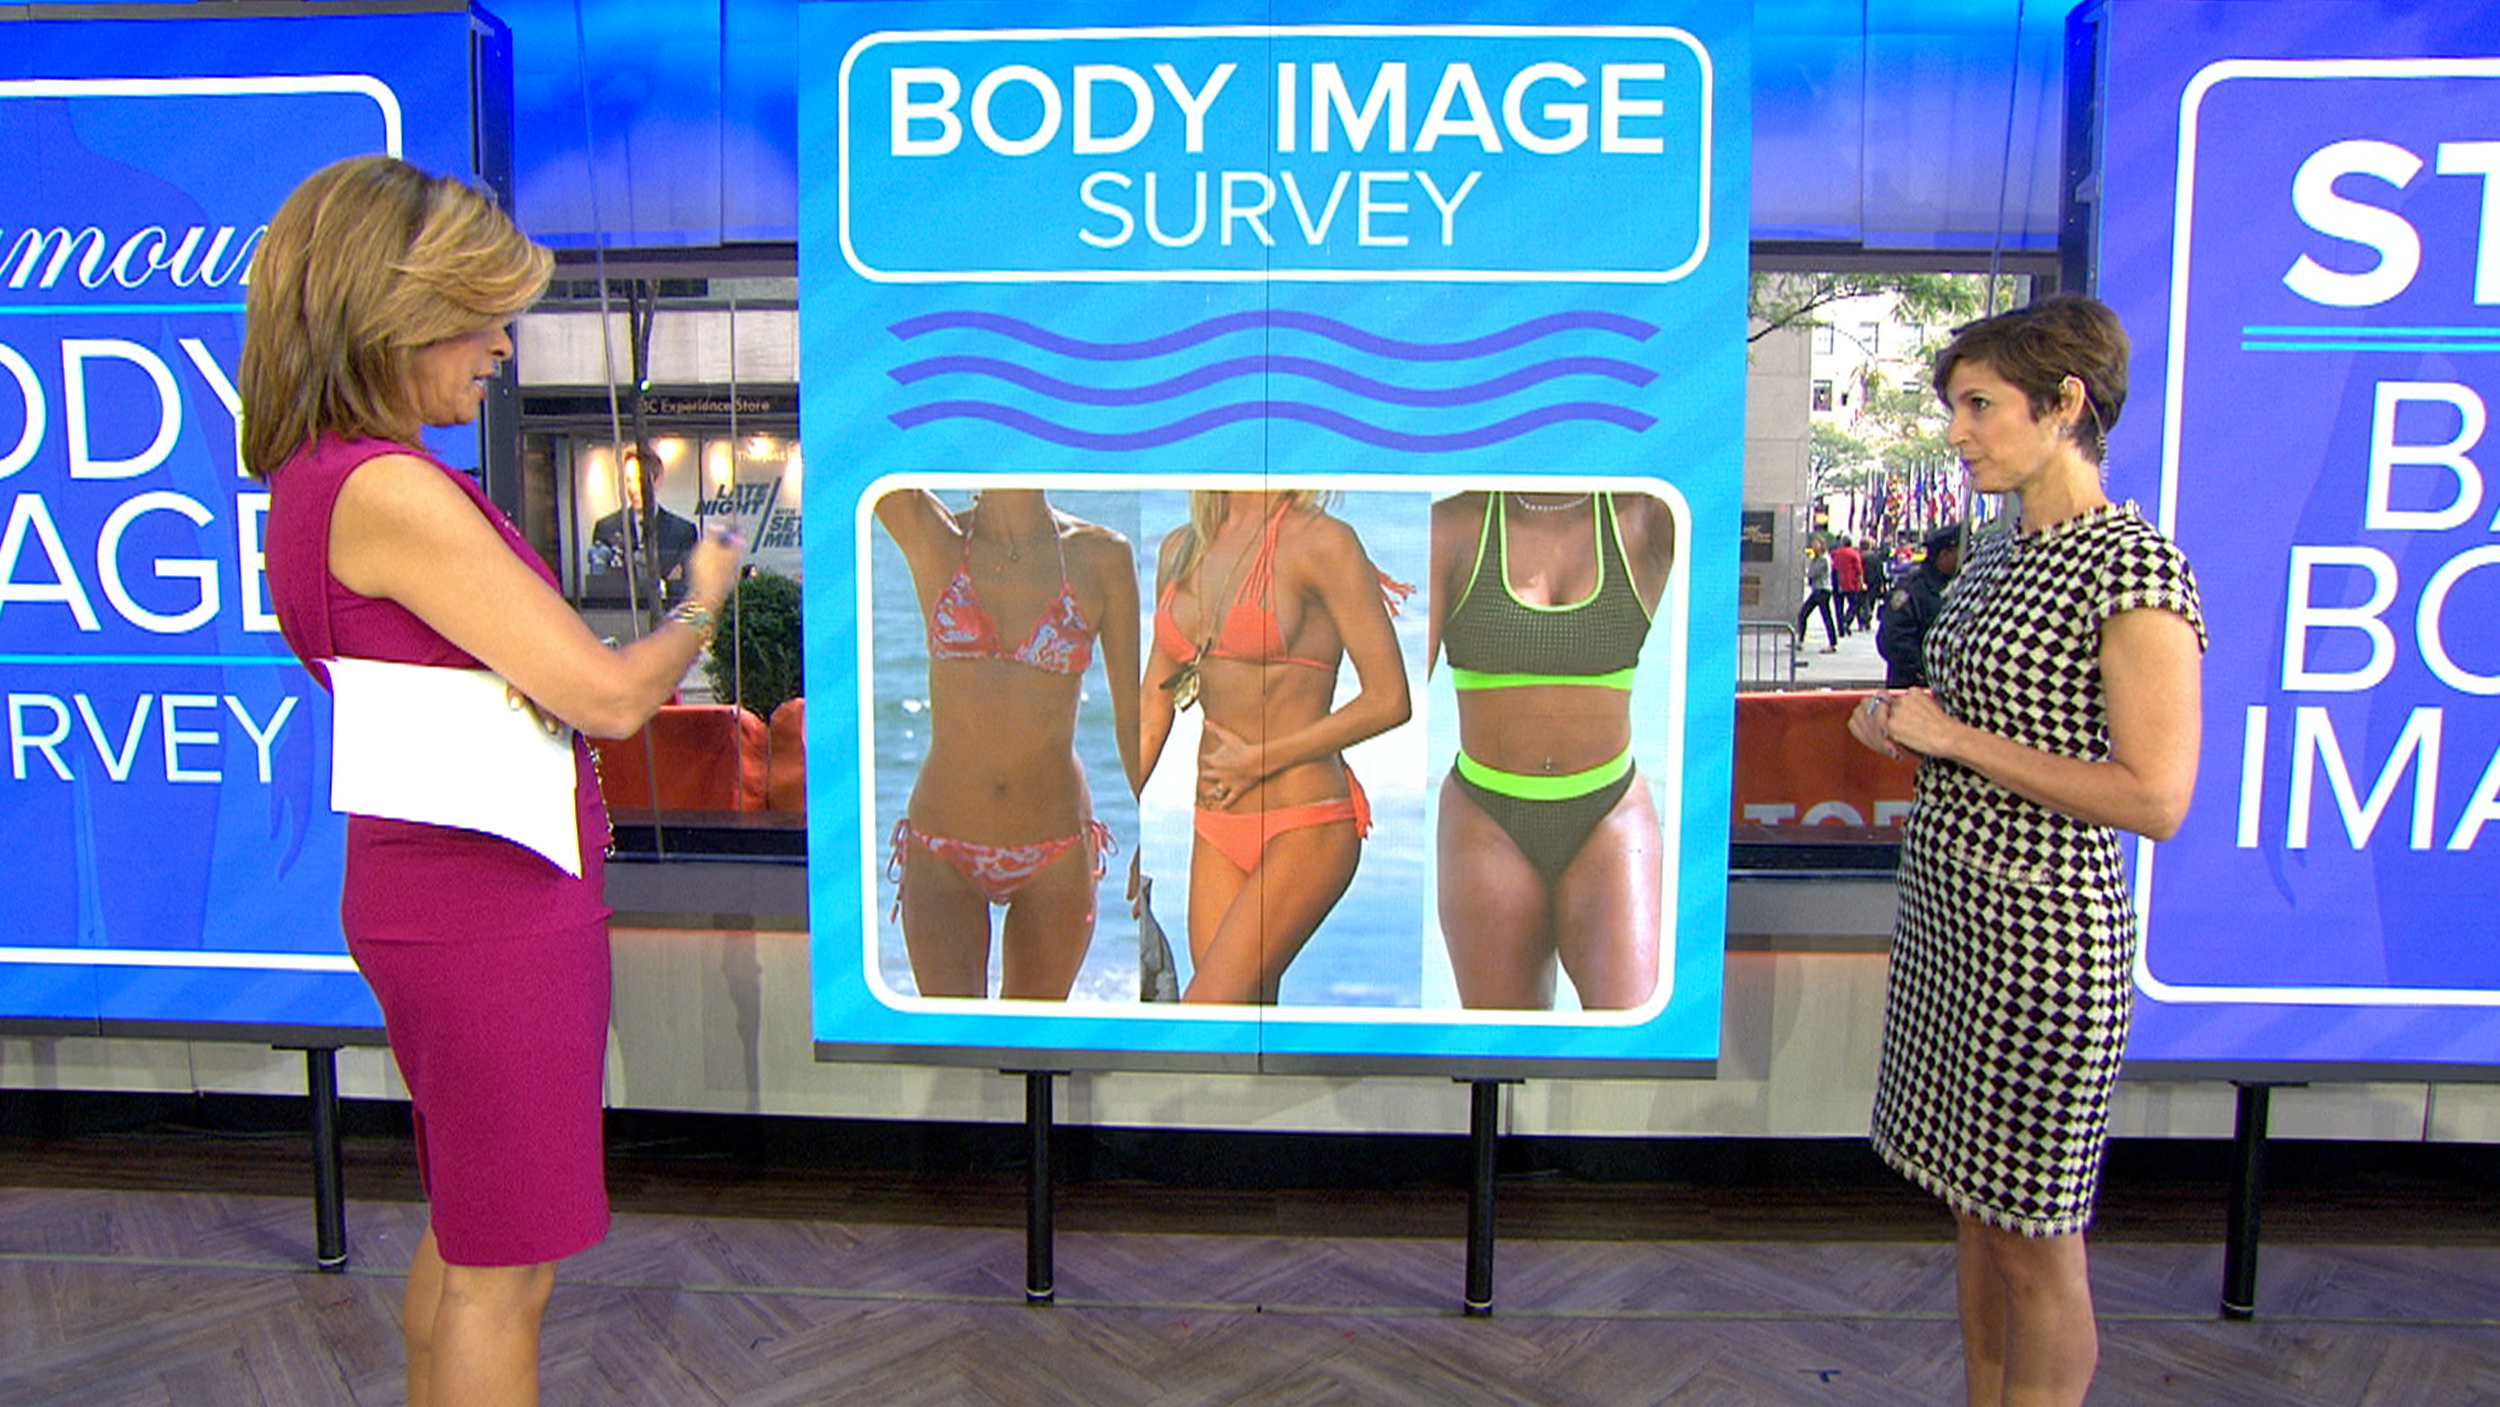 donald mccaughey recommends Women Exposing Their Bodies